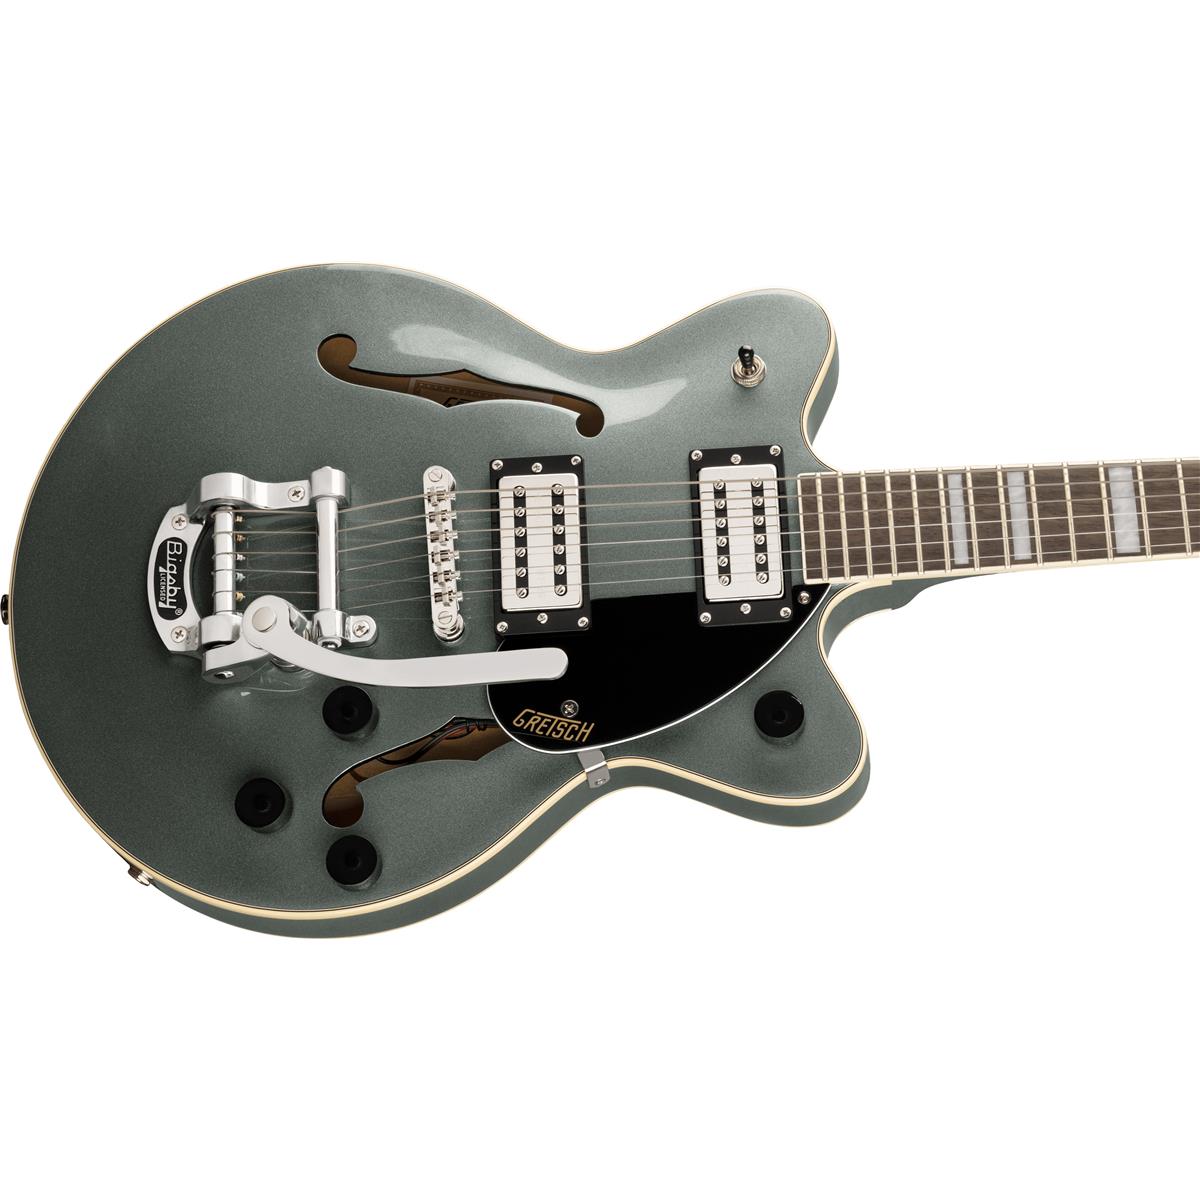 Gretsch G2655T Streamliner Center Block Jr. Double-Cut Bigsby Electric Guitar $299 + free s/h